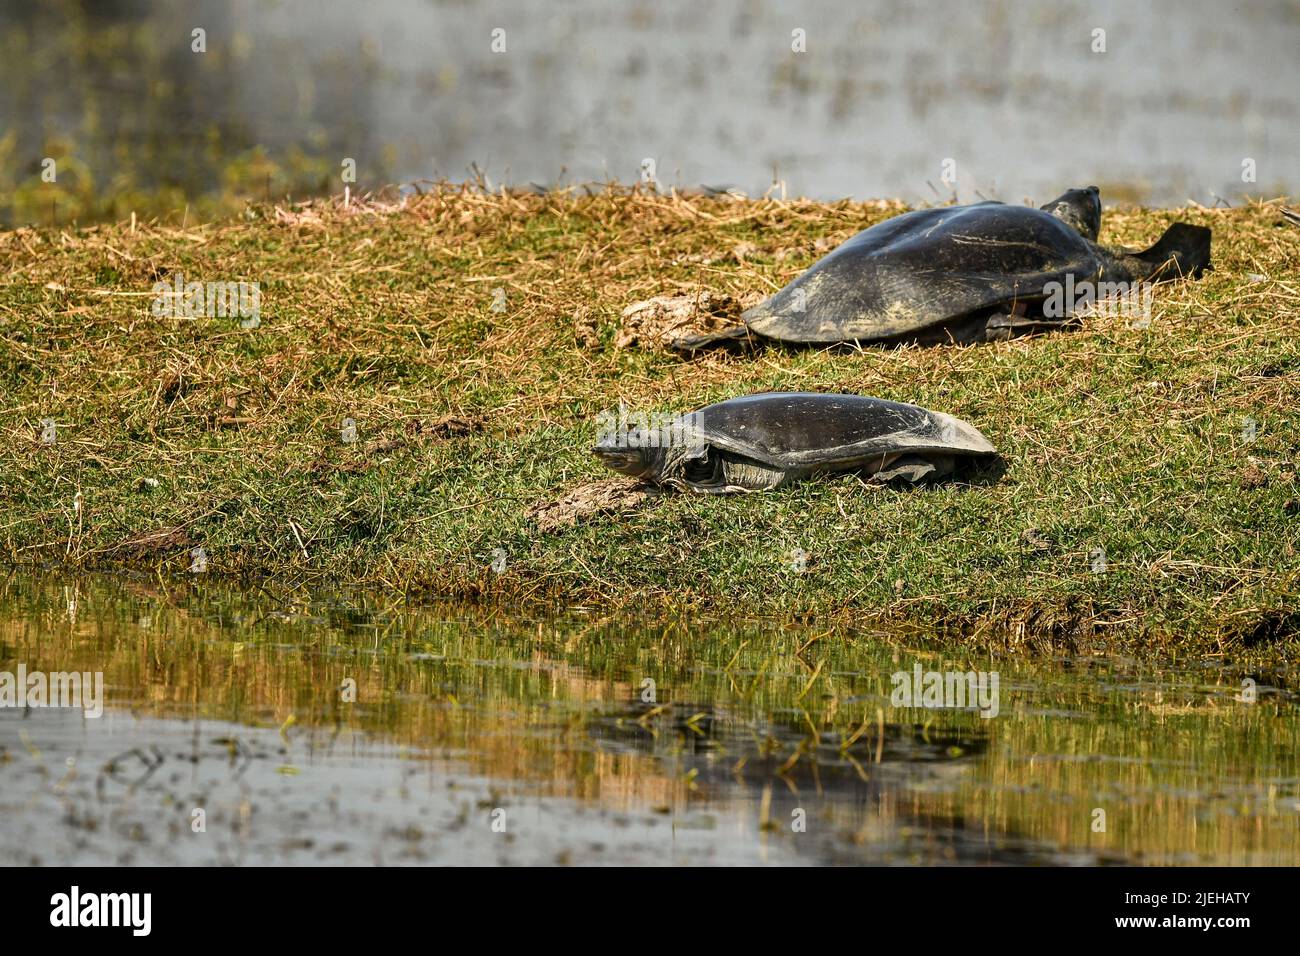 Indian softshell or Ganges softshell turtle pair on green grass a vulnerable species portrait basking sun in winter season of keoladeo national park Stock Photo